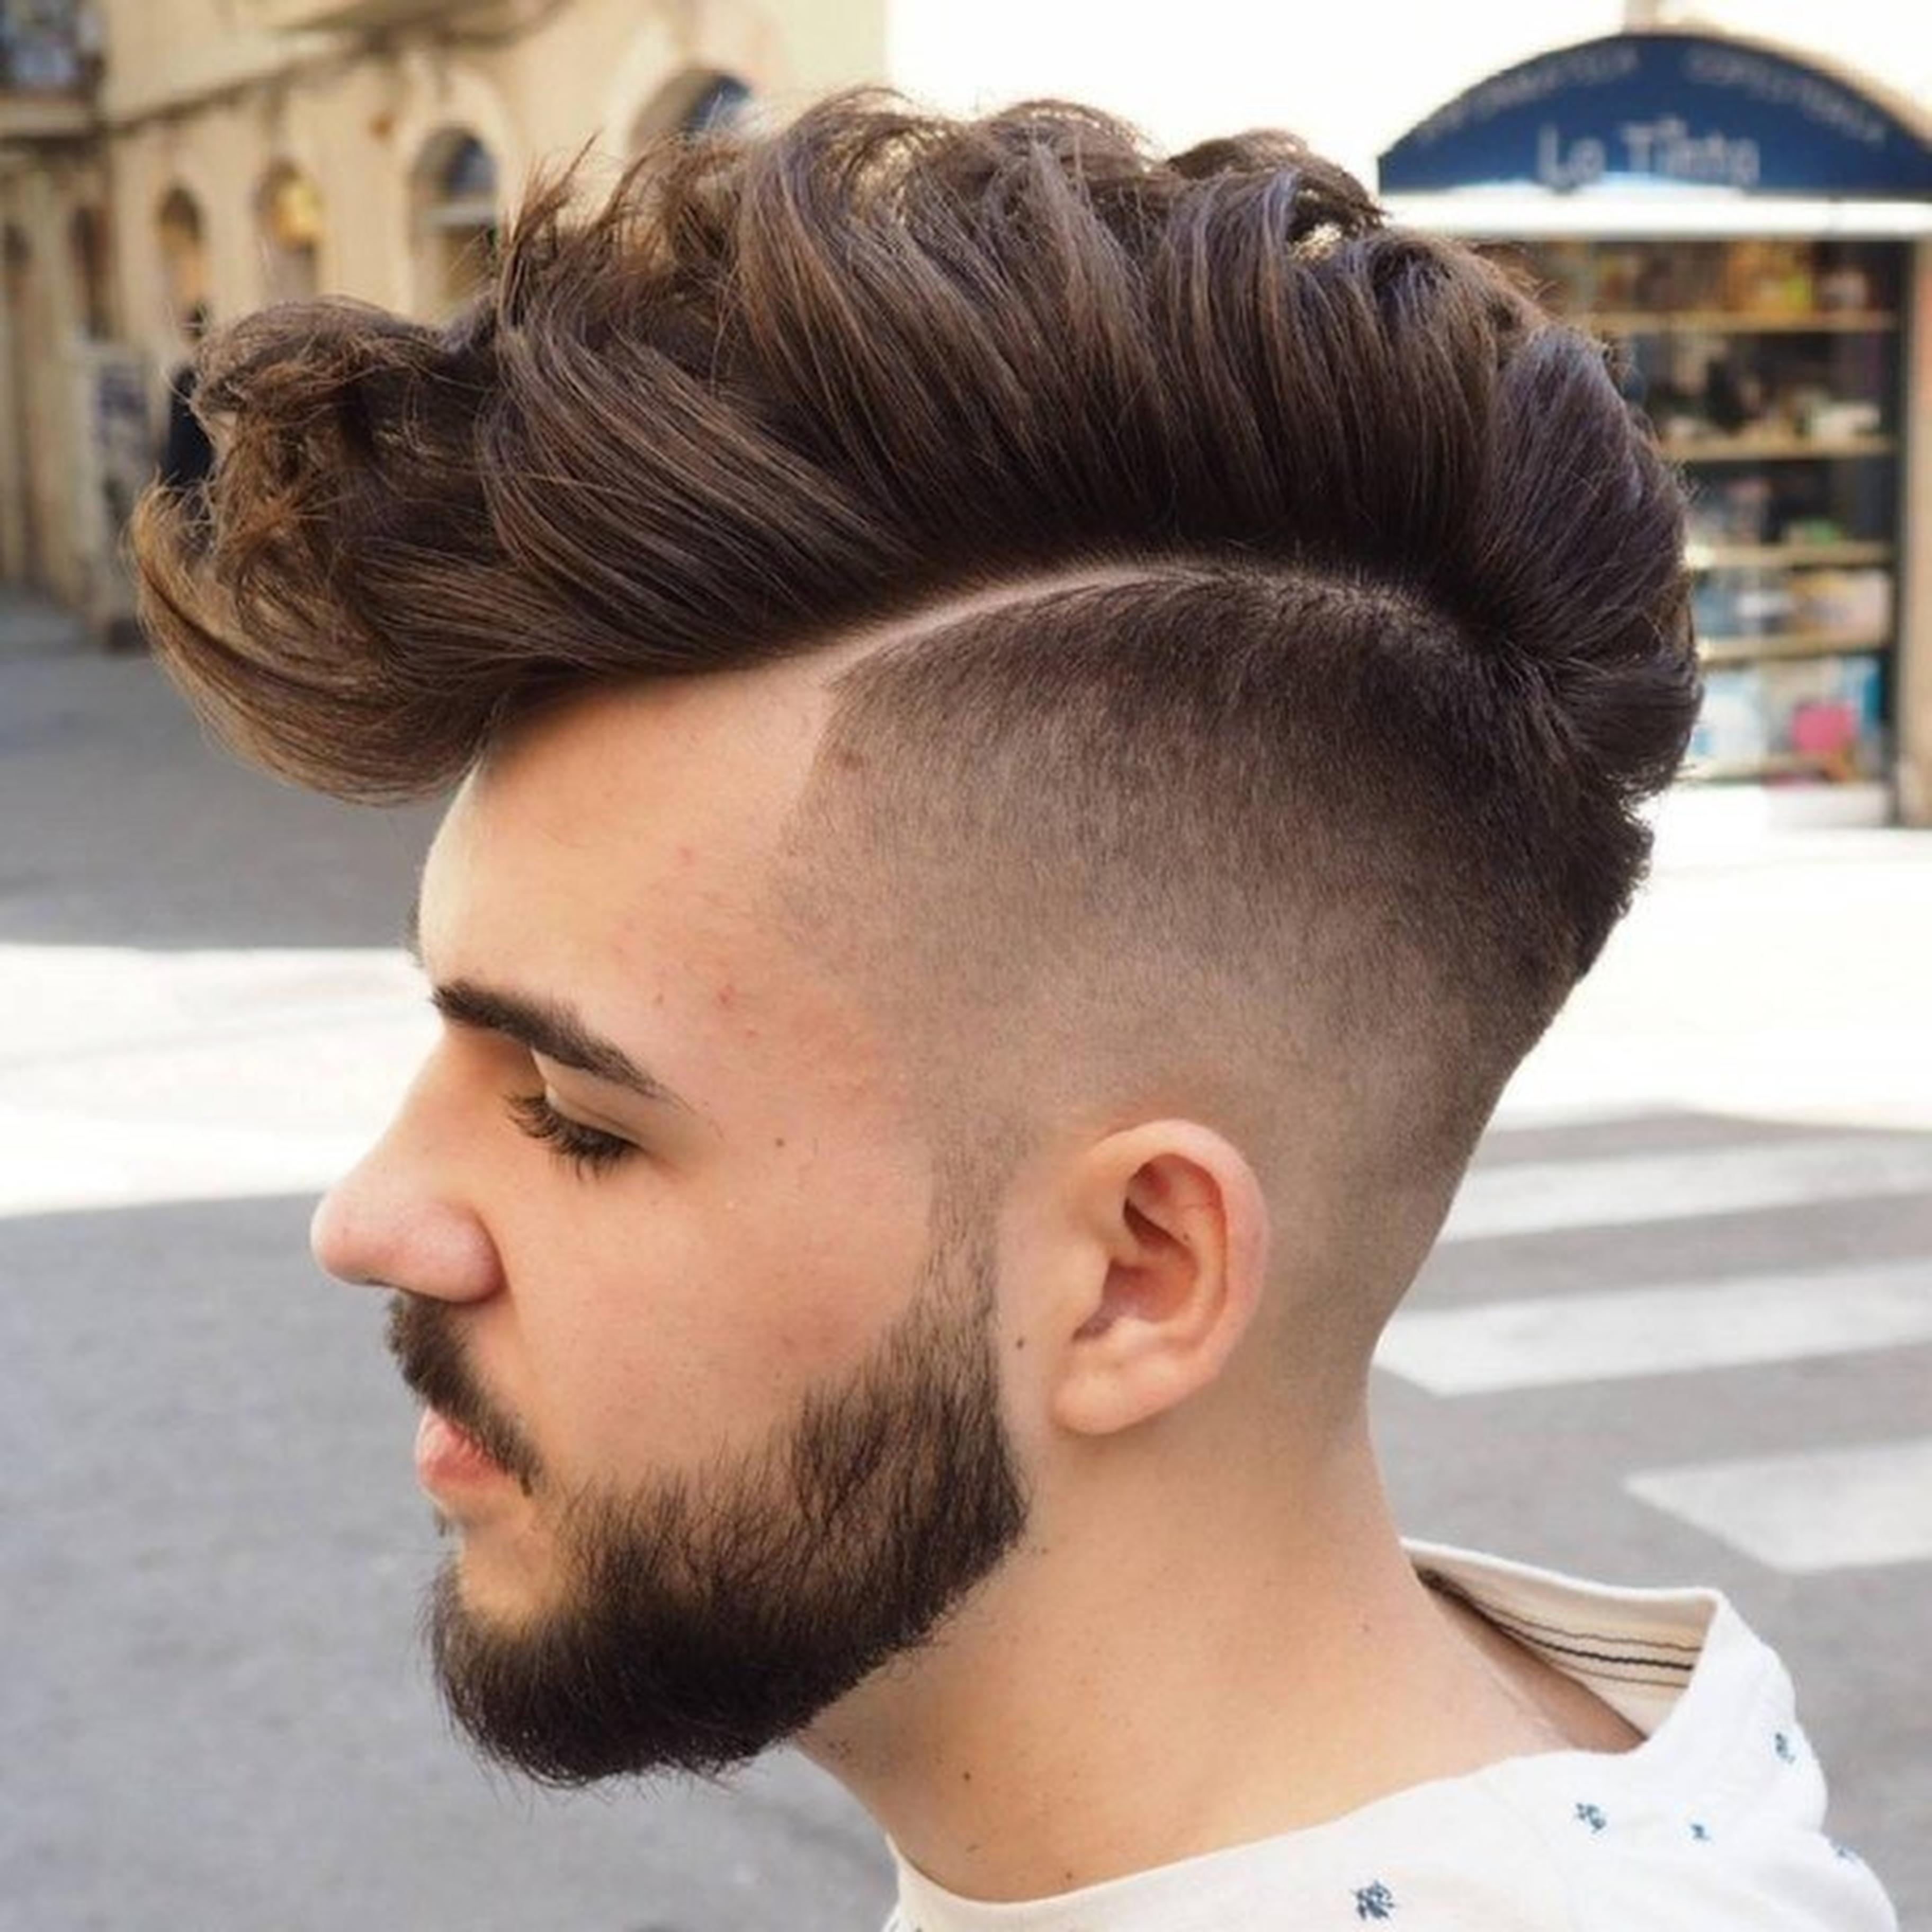 10 Stylish Mens Haircuts 2021 | Cool Hairstyle for Boys 2021 | Mens Haircut  and Hairstyles - YouTube